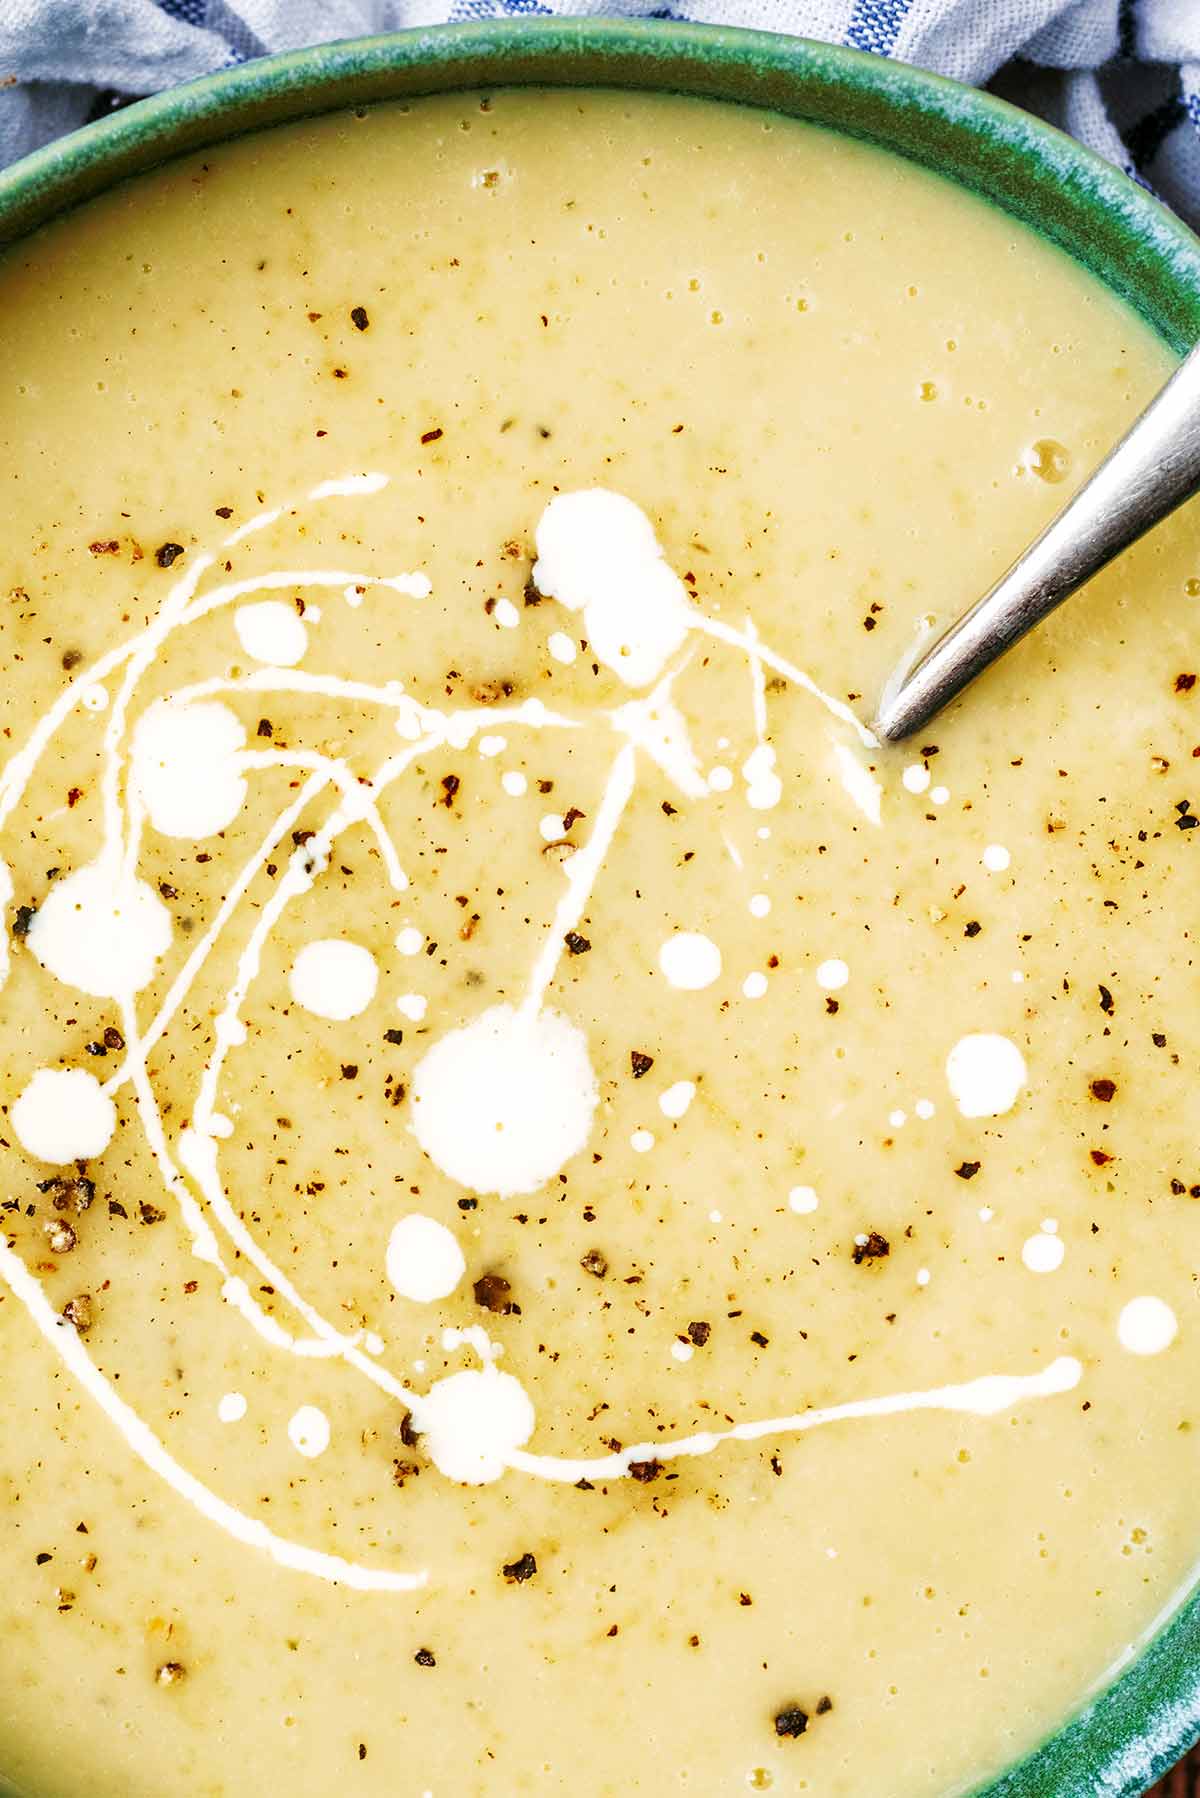 Cream drizzles over a bowl of parsnip soup.